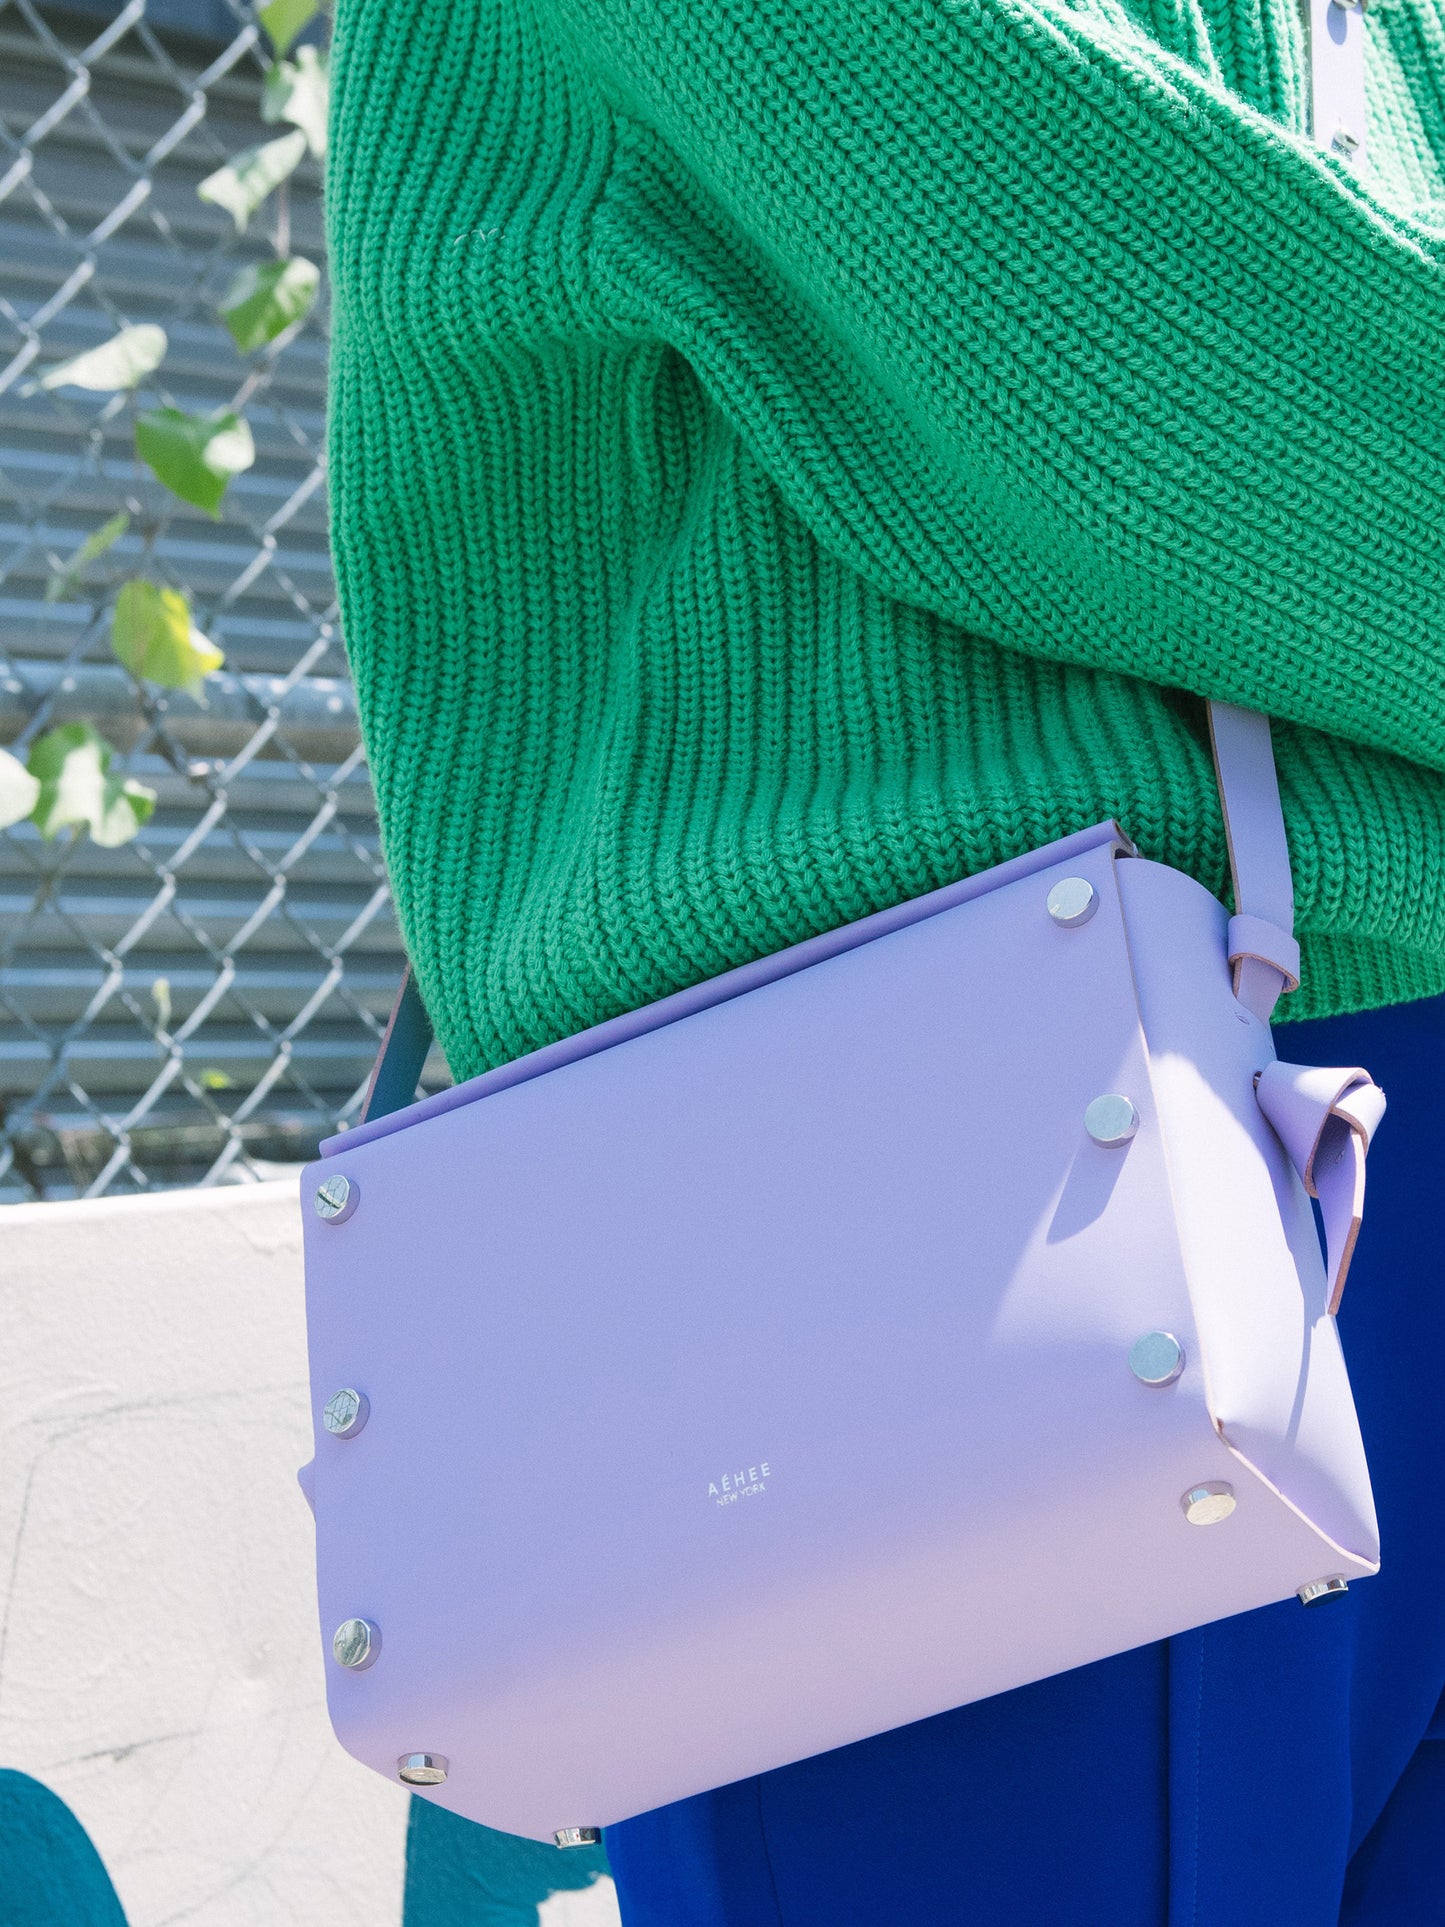 Chic lavender crossbody bag and shoulder bag with adjustable strap crafted from Italian vegetable tanned leather for a minimal yet sophisticated look.